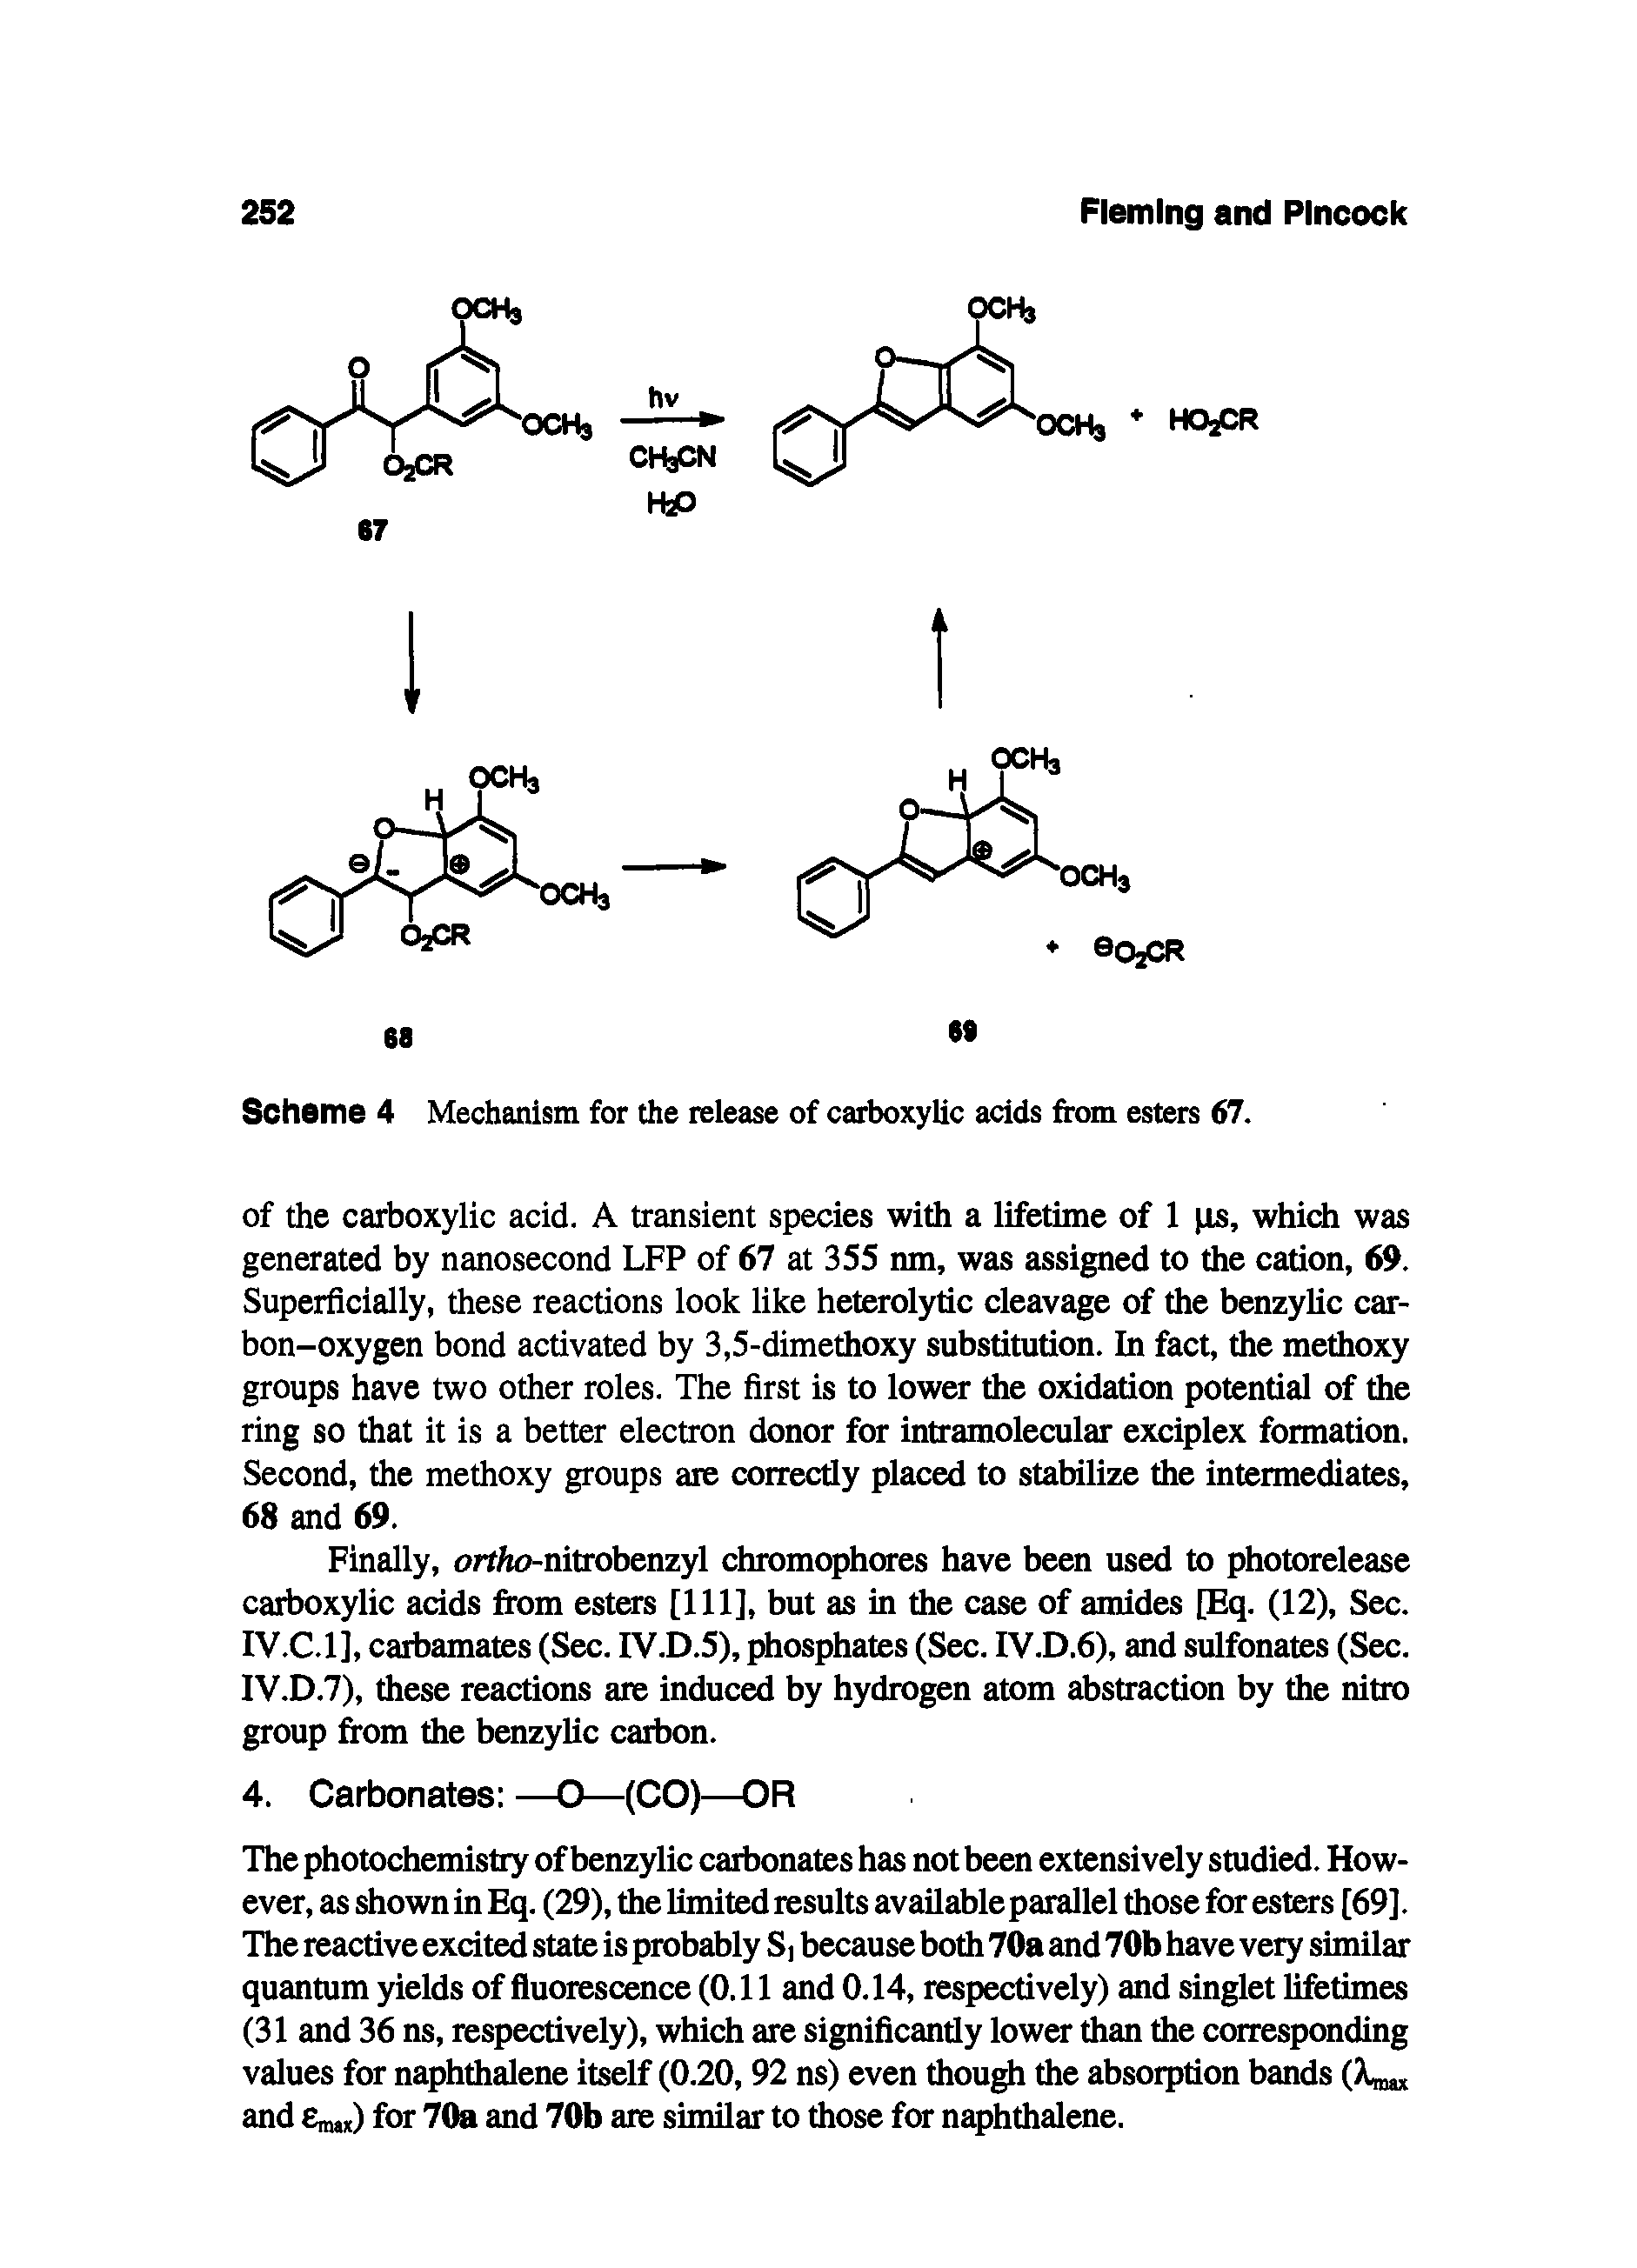 Scheme 4 Mechanism for the release of carboxylic acids from esters 67.